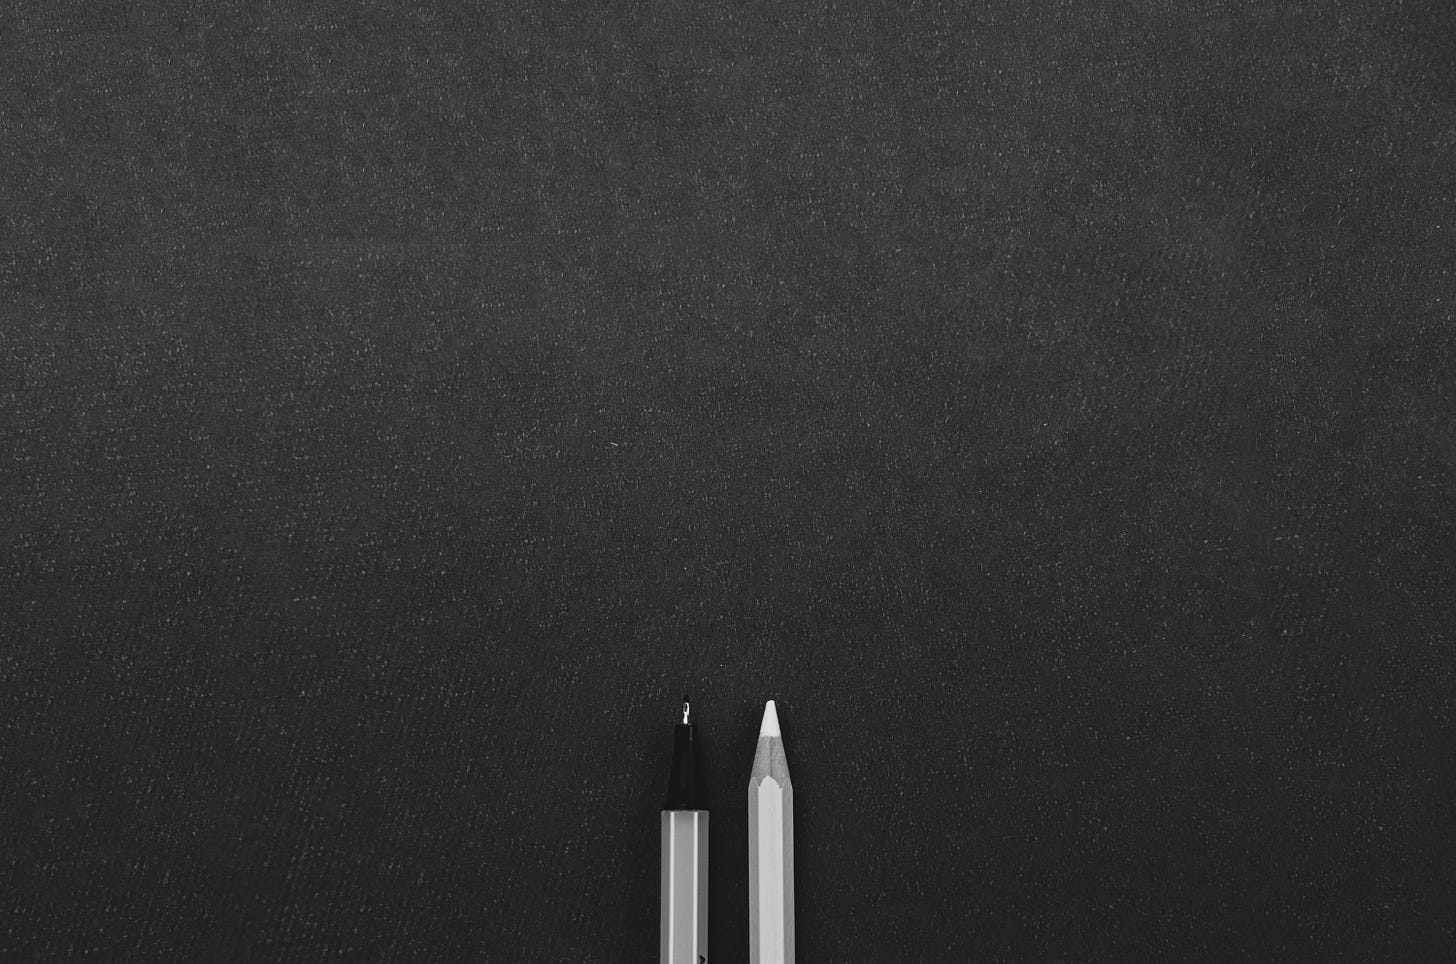 Two pens on a black surface.